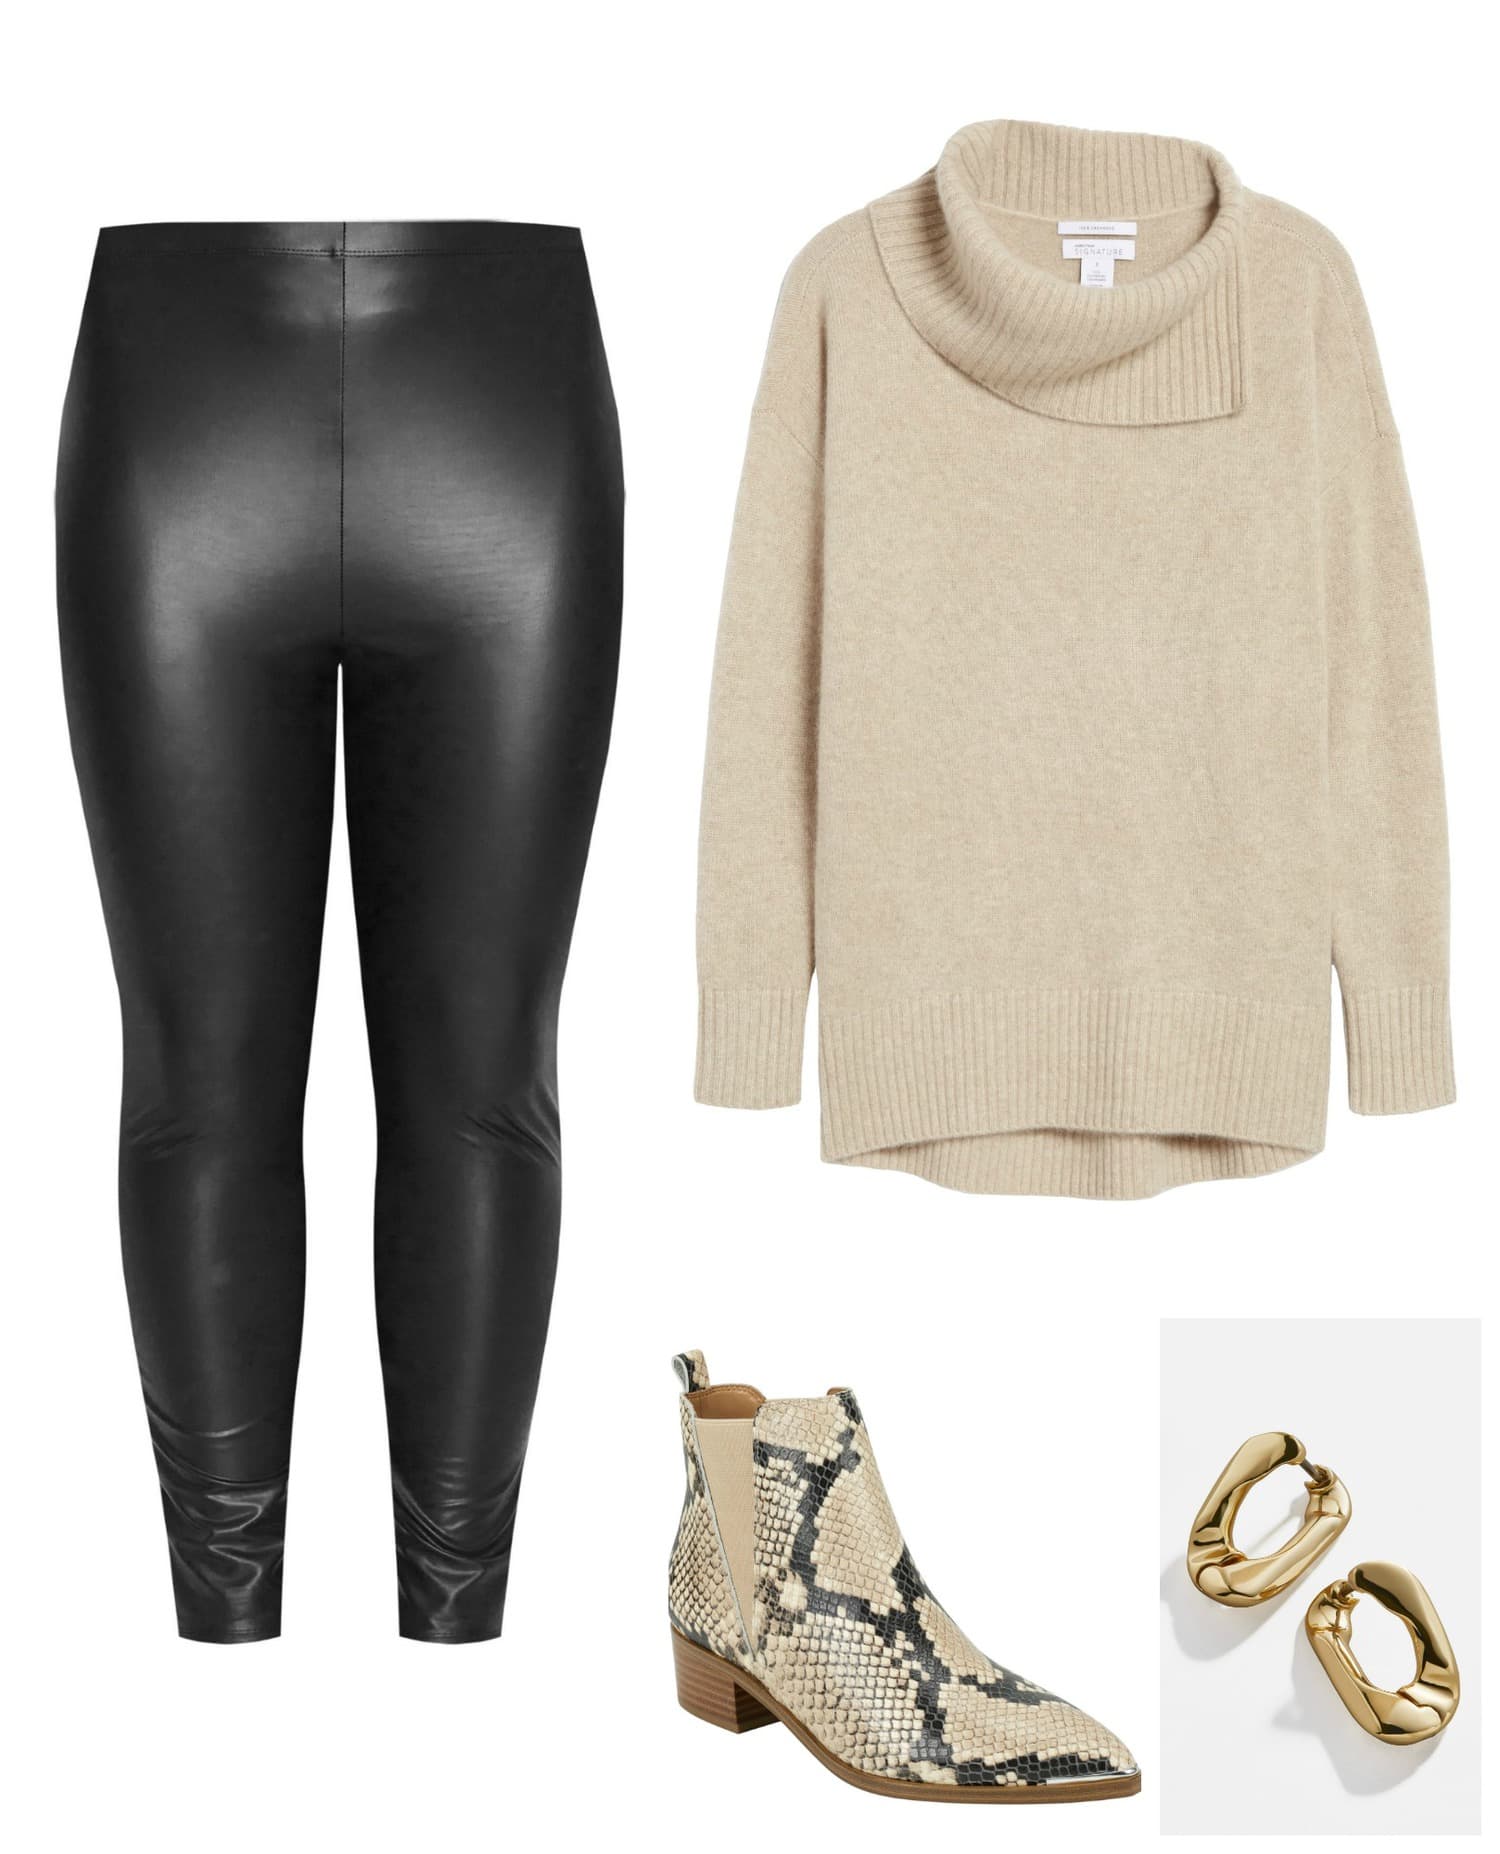 shoes to wear with faux leather leggings